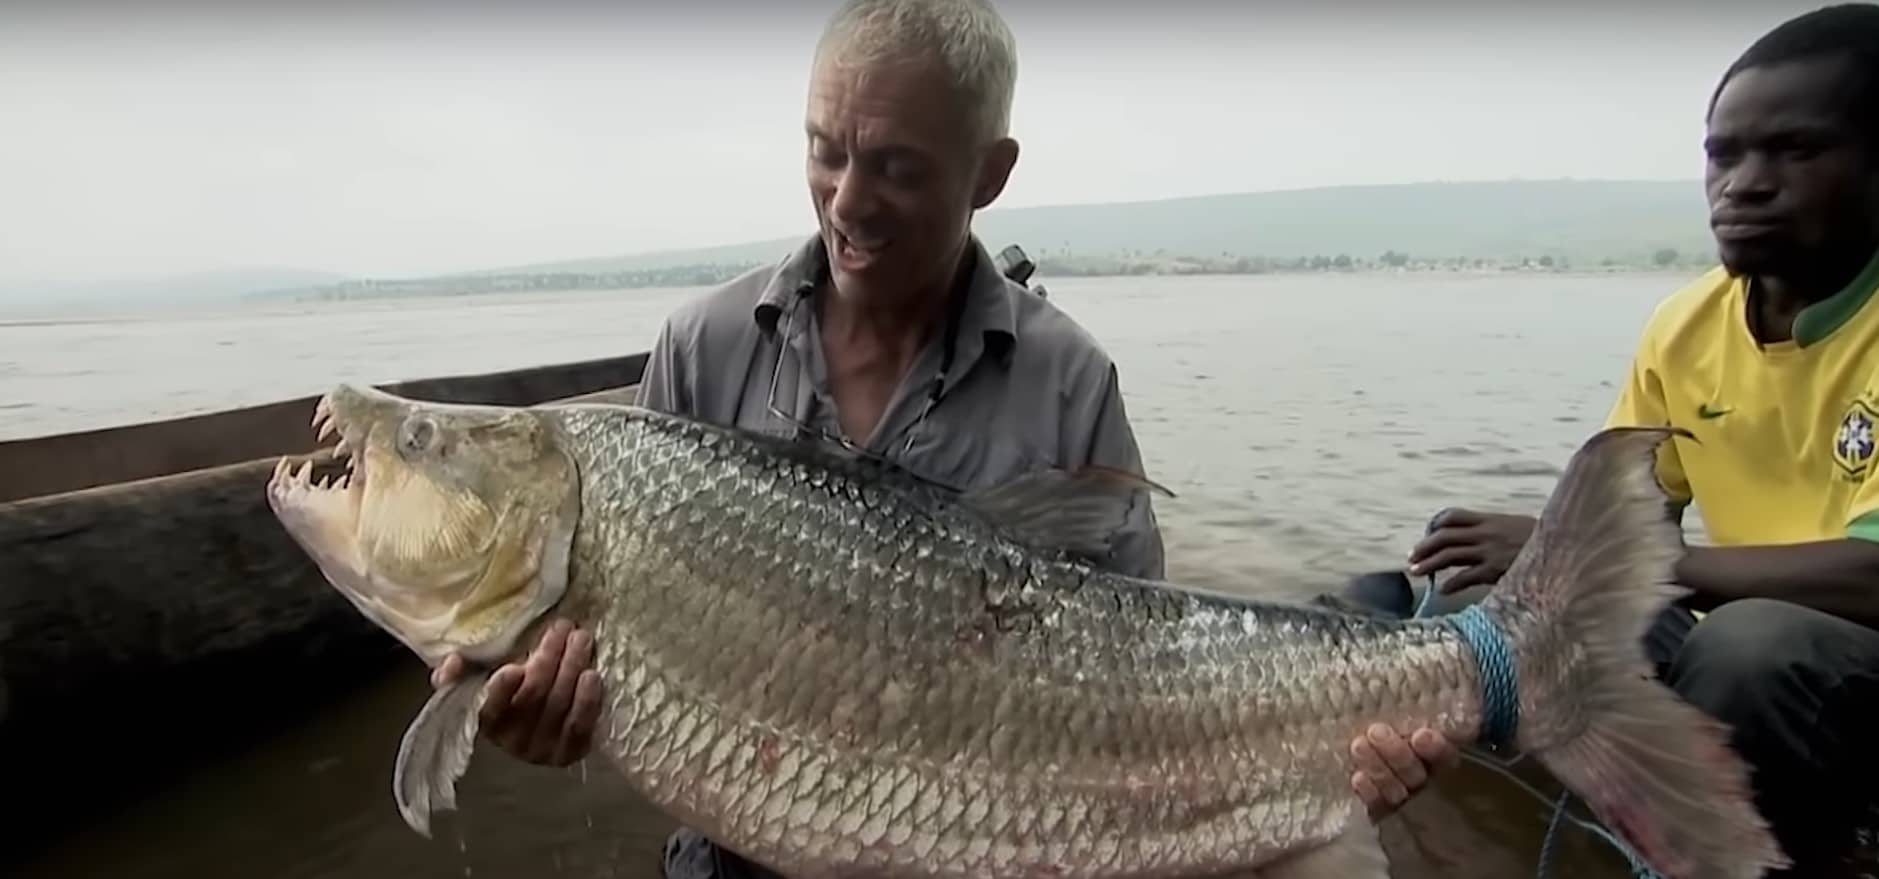 Why Did River Monsters End?